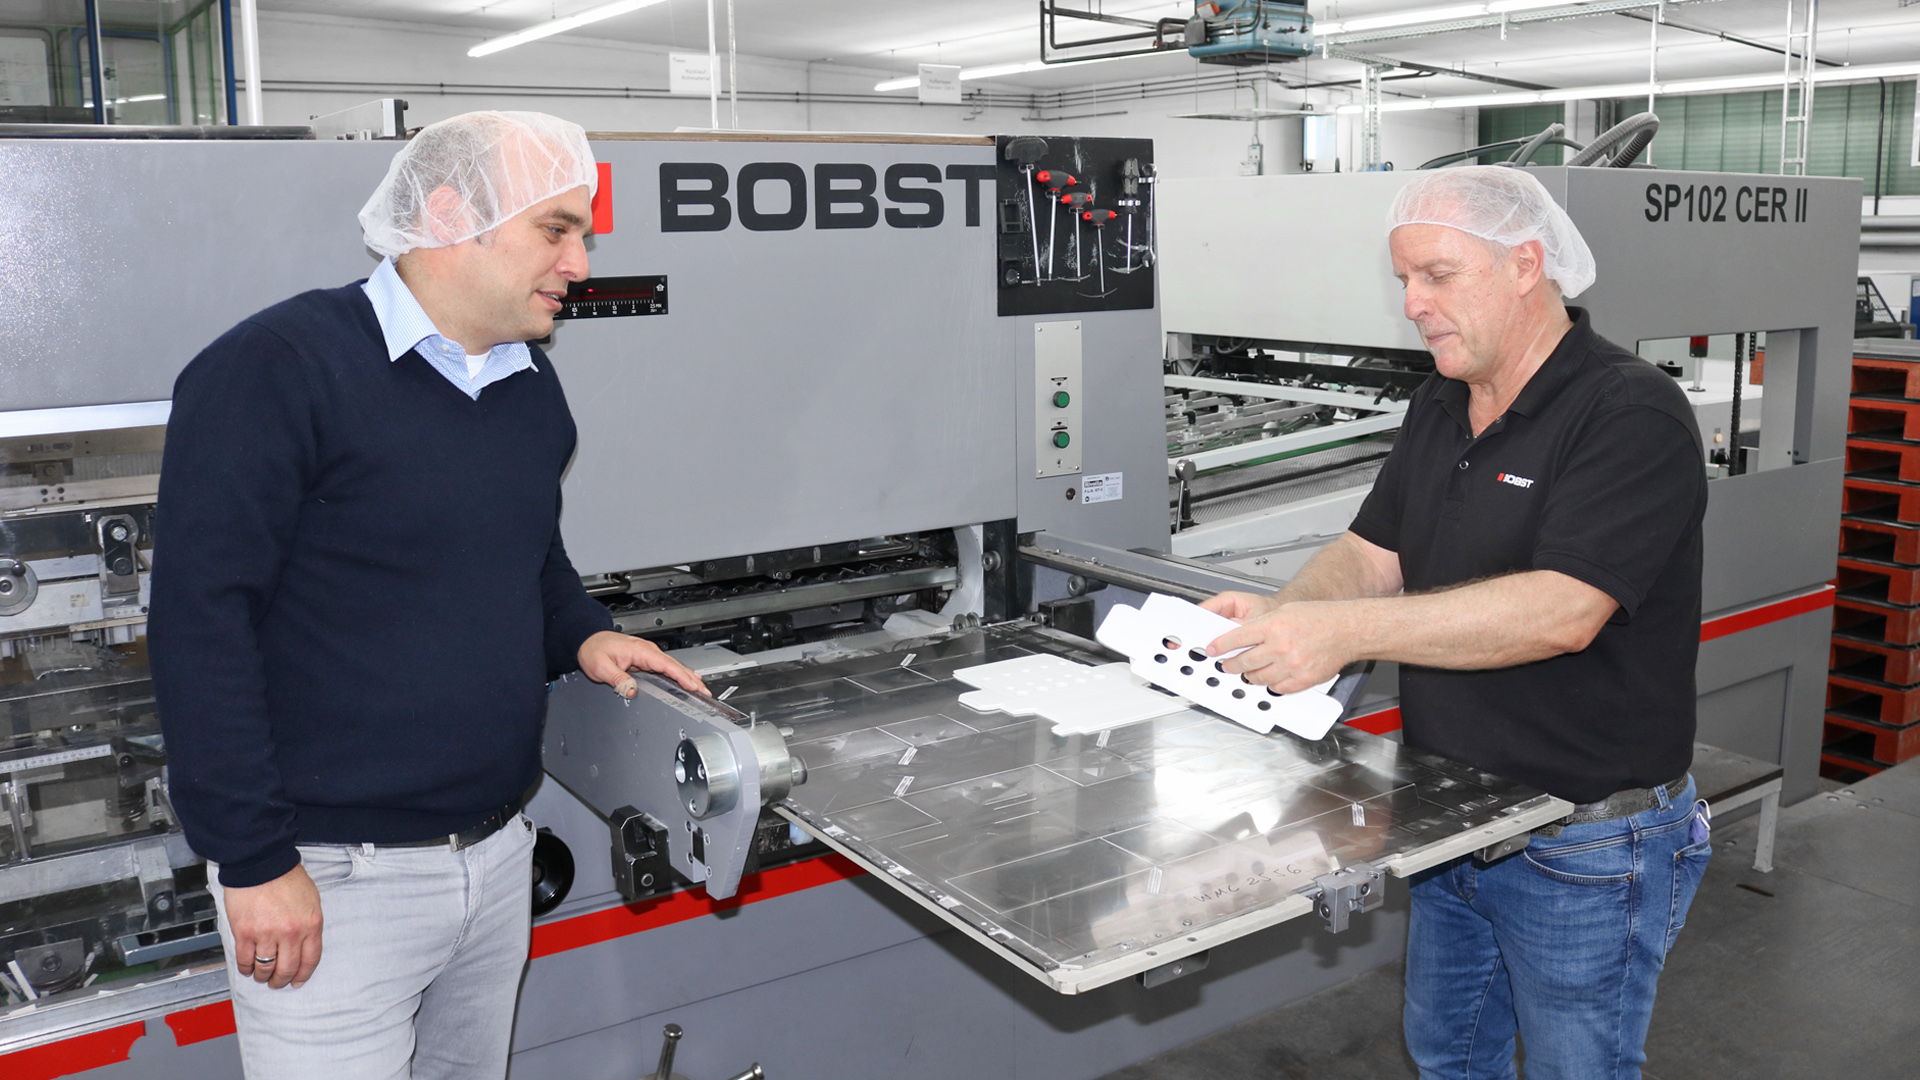 Managing Director Michael Spiegel (left) and Manfred Wöhning from Bobst Meerbusch at the BOBST die-cutter SP102 CER II.